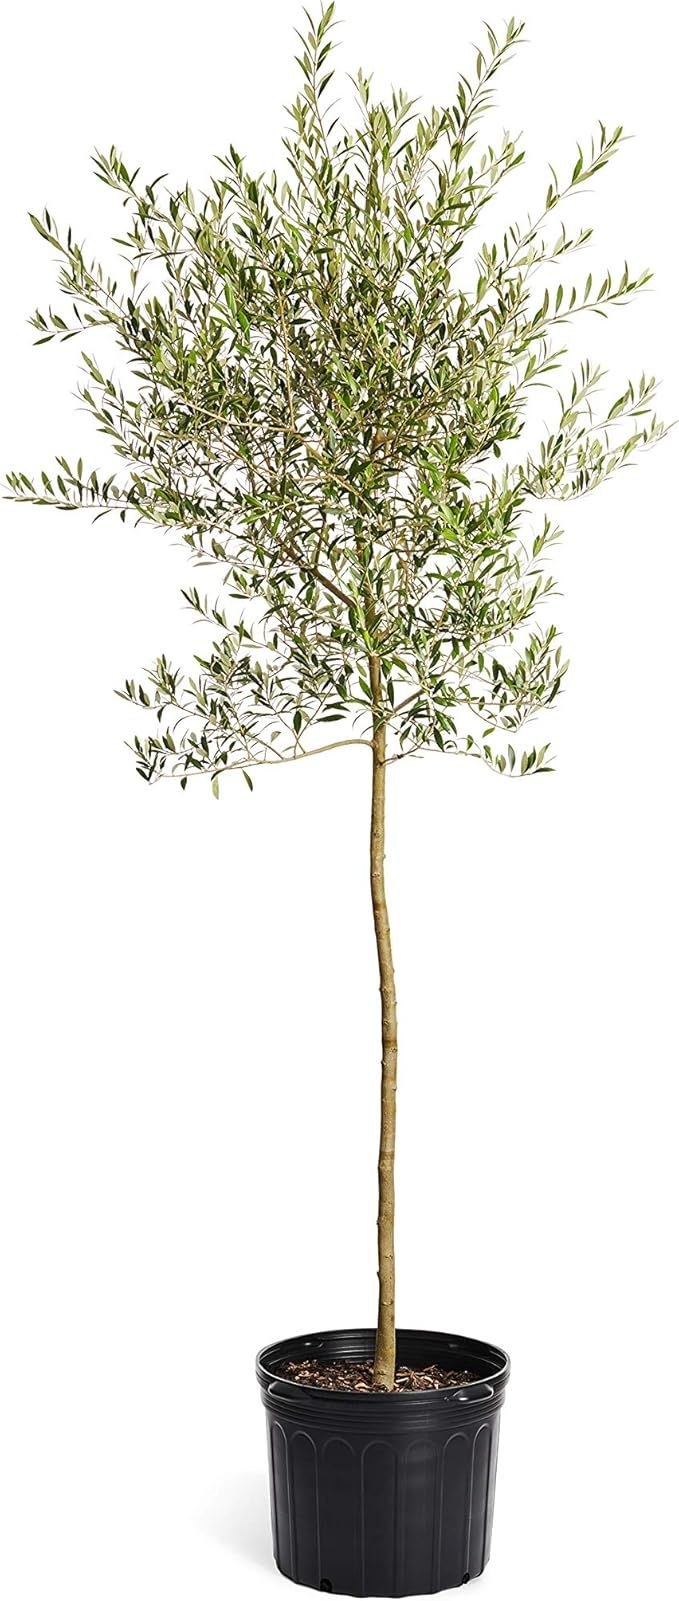 Brighter Blooms - Arbequina Olive Tree, 5-6 Feet Tall - Indoor/Patio Live Olive Trees - No Shippi... | Amazon (US)